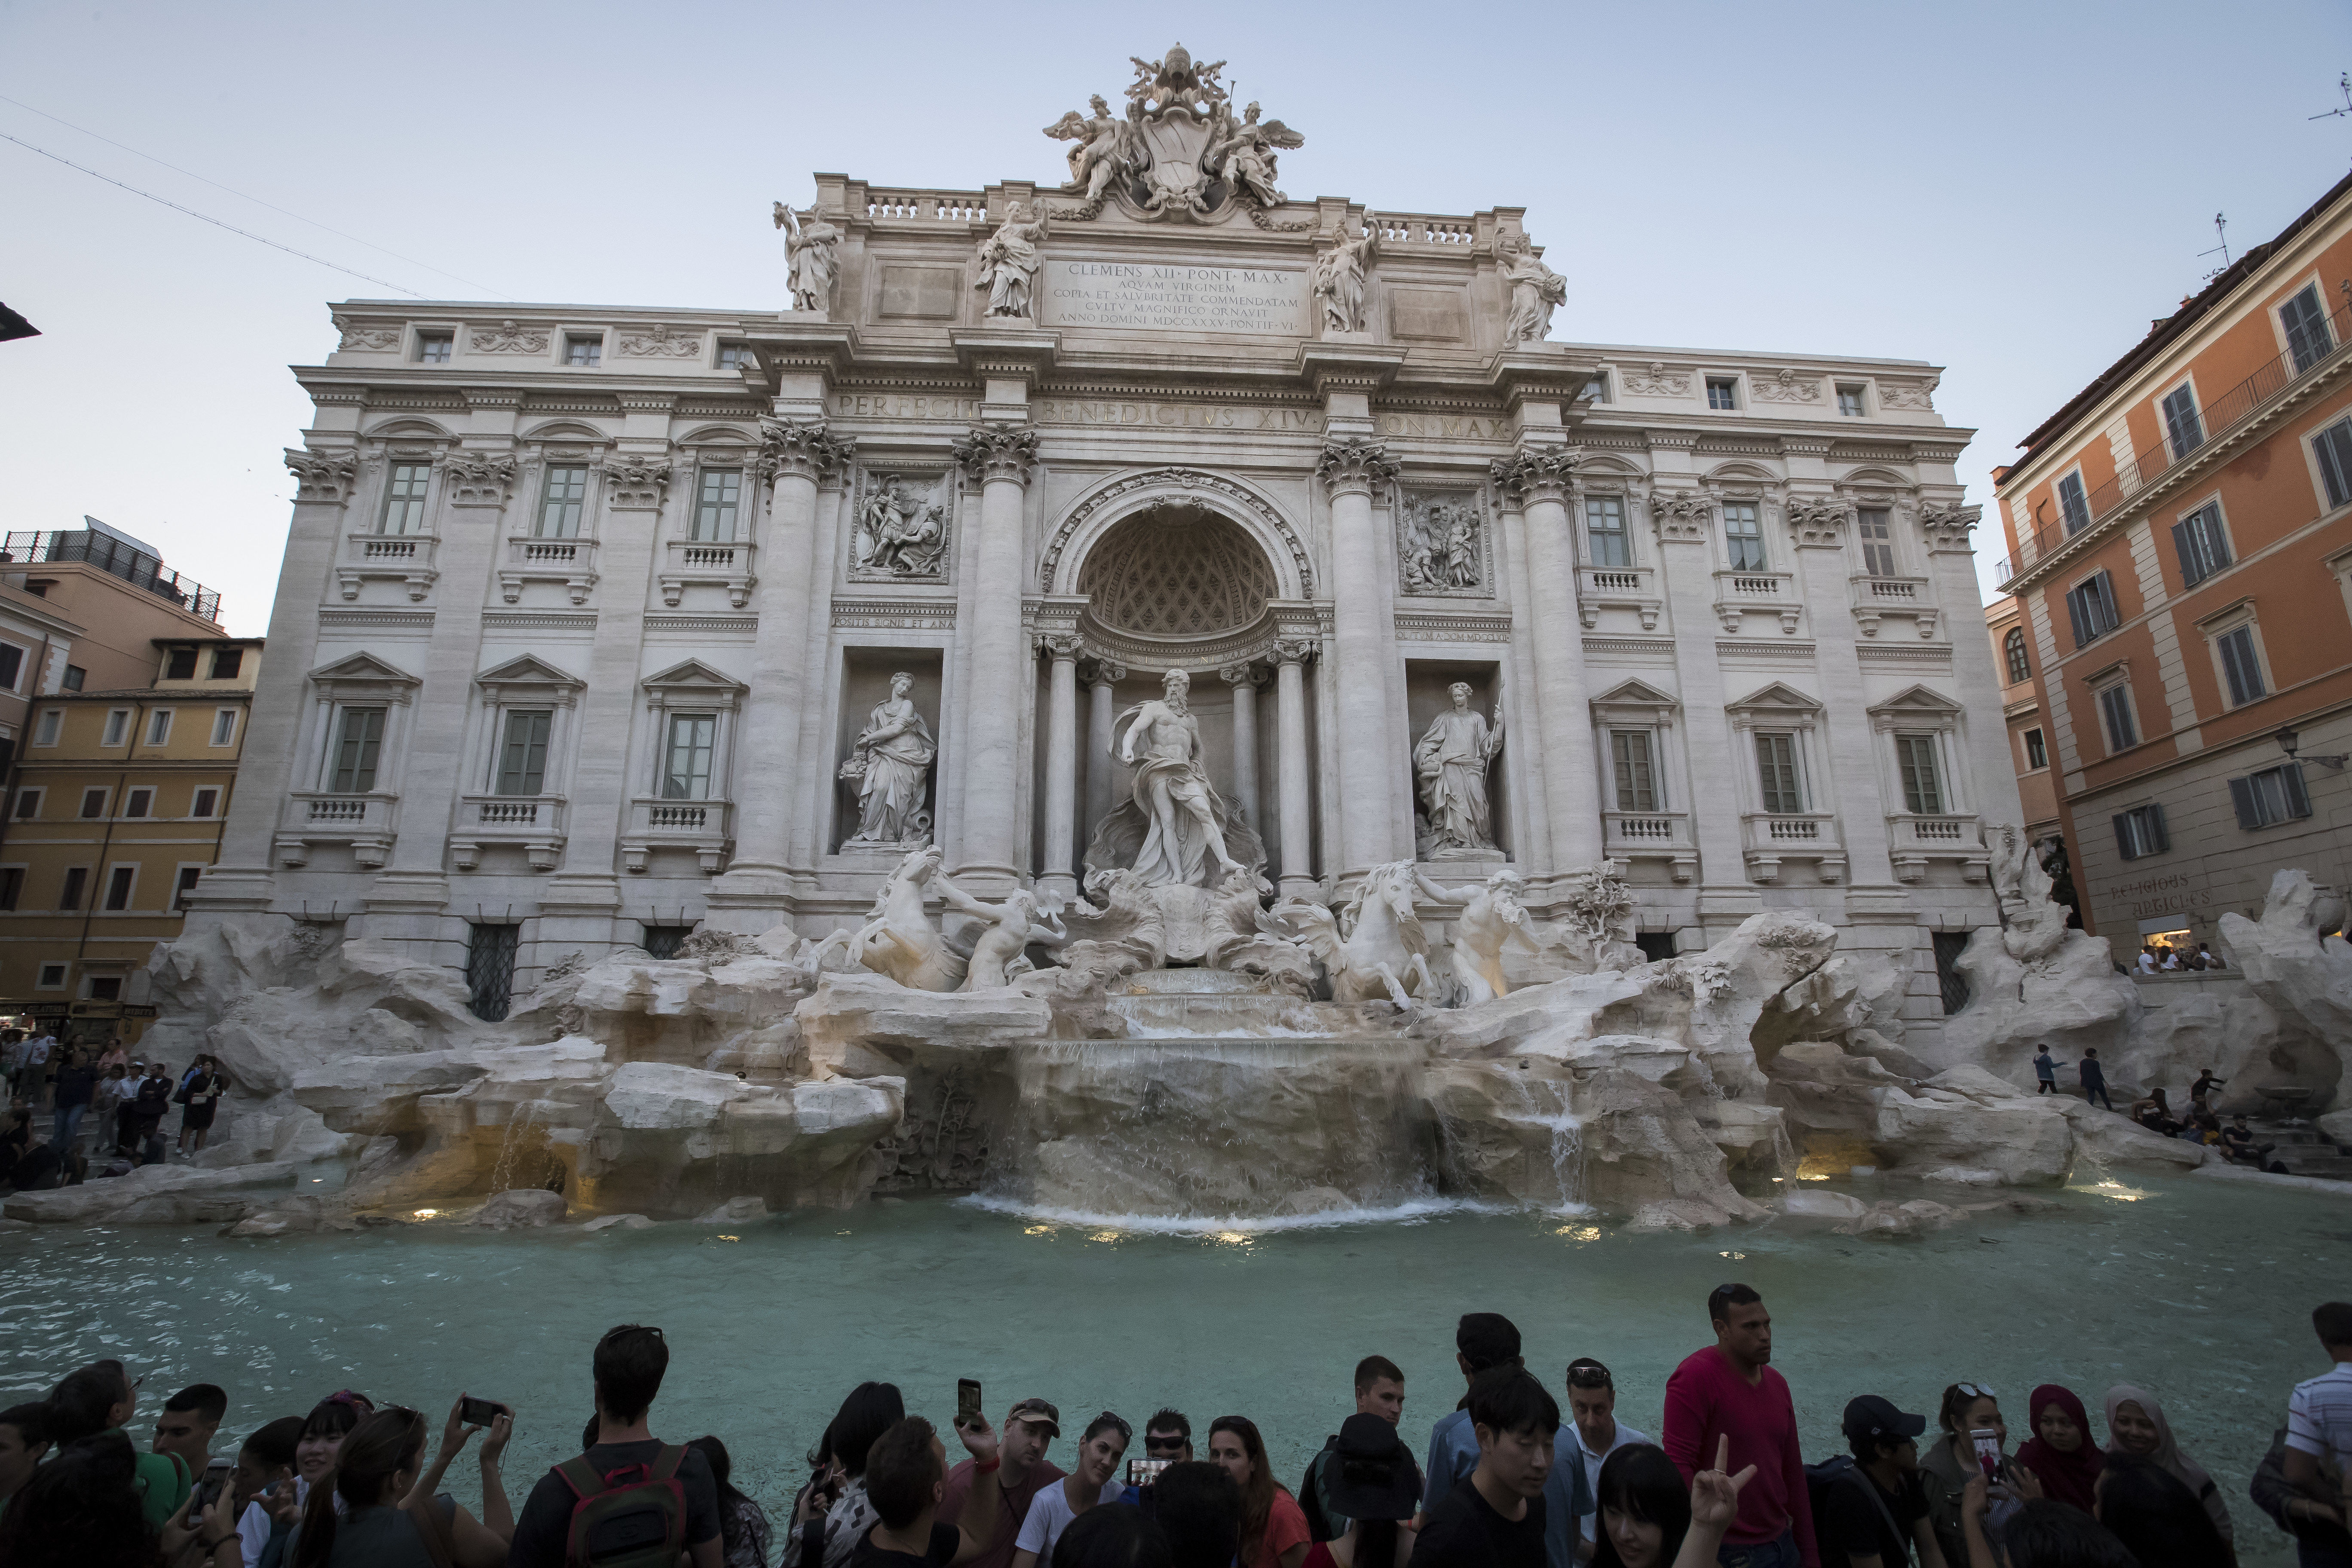 Students visiting the Trevi fountain.